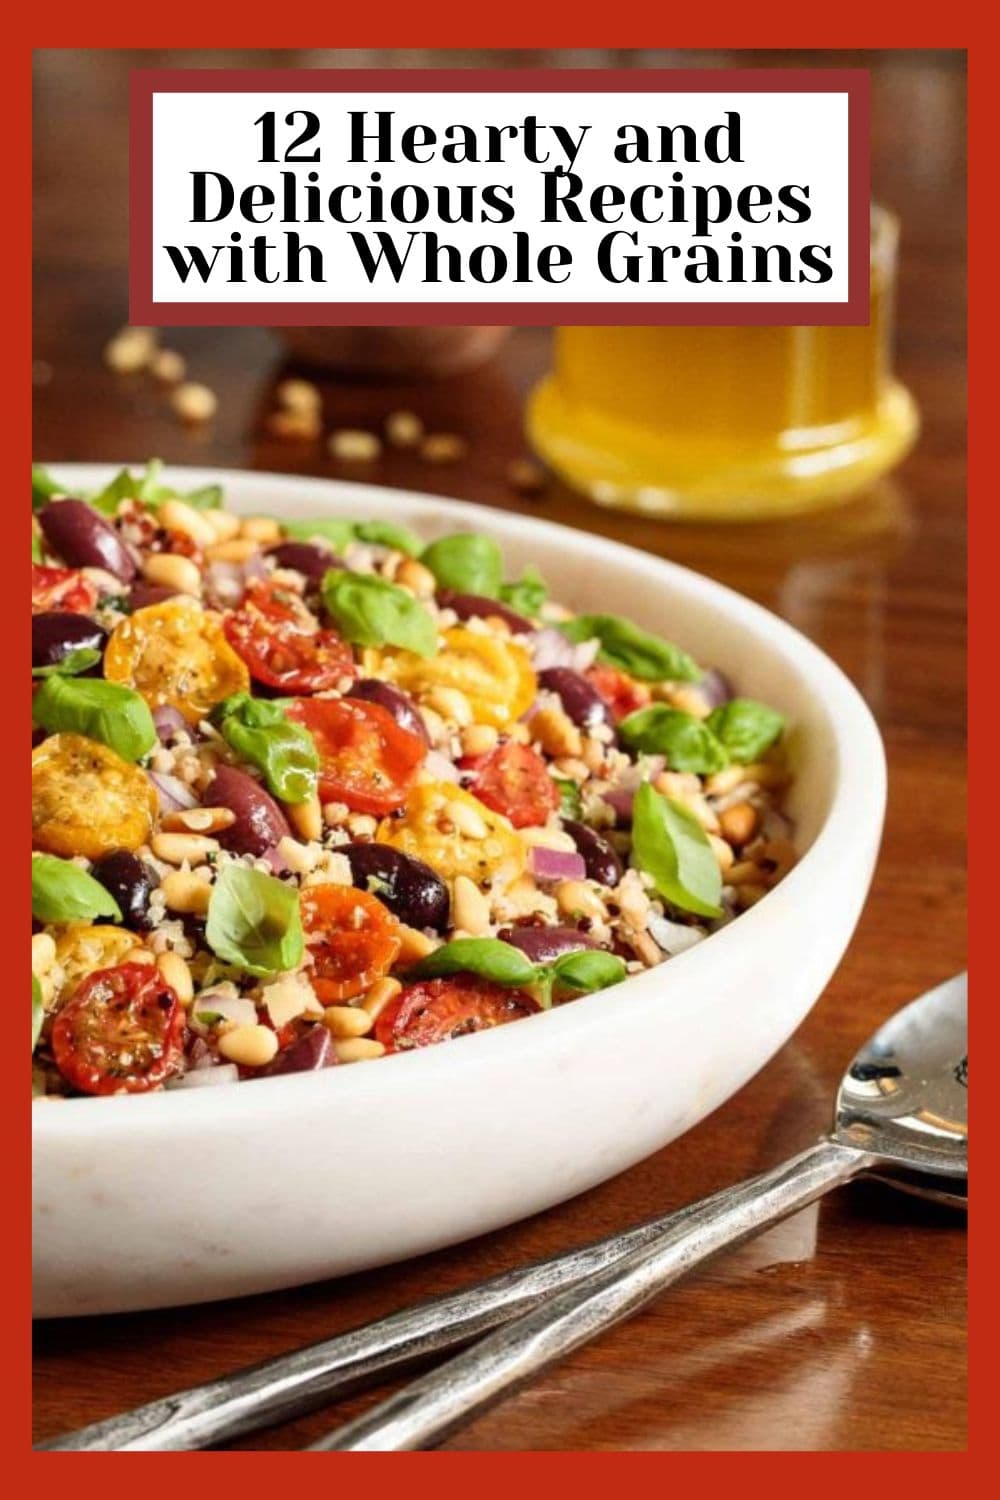 15 Hearty, Happy Whole Grain Recipes - Delicious Ideas for Breakfast, Lunch and Dinner